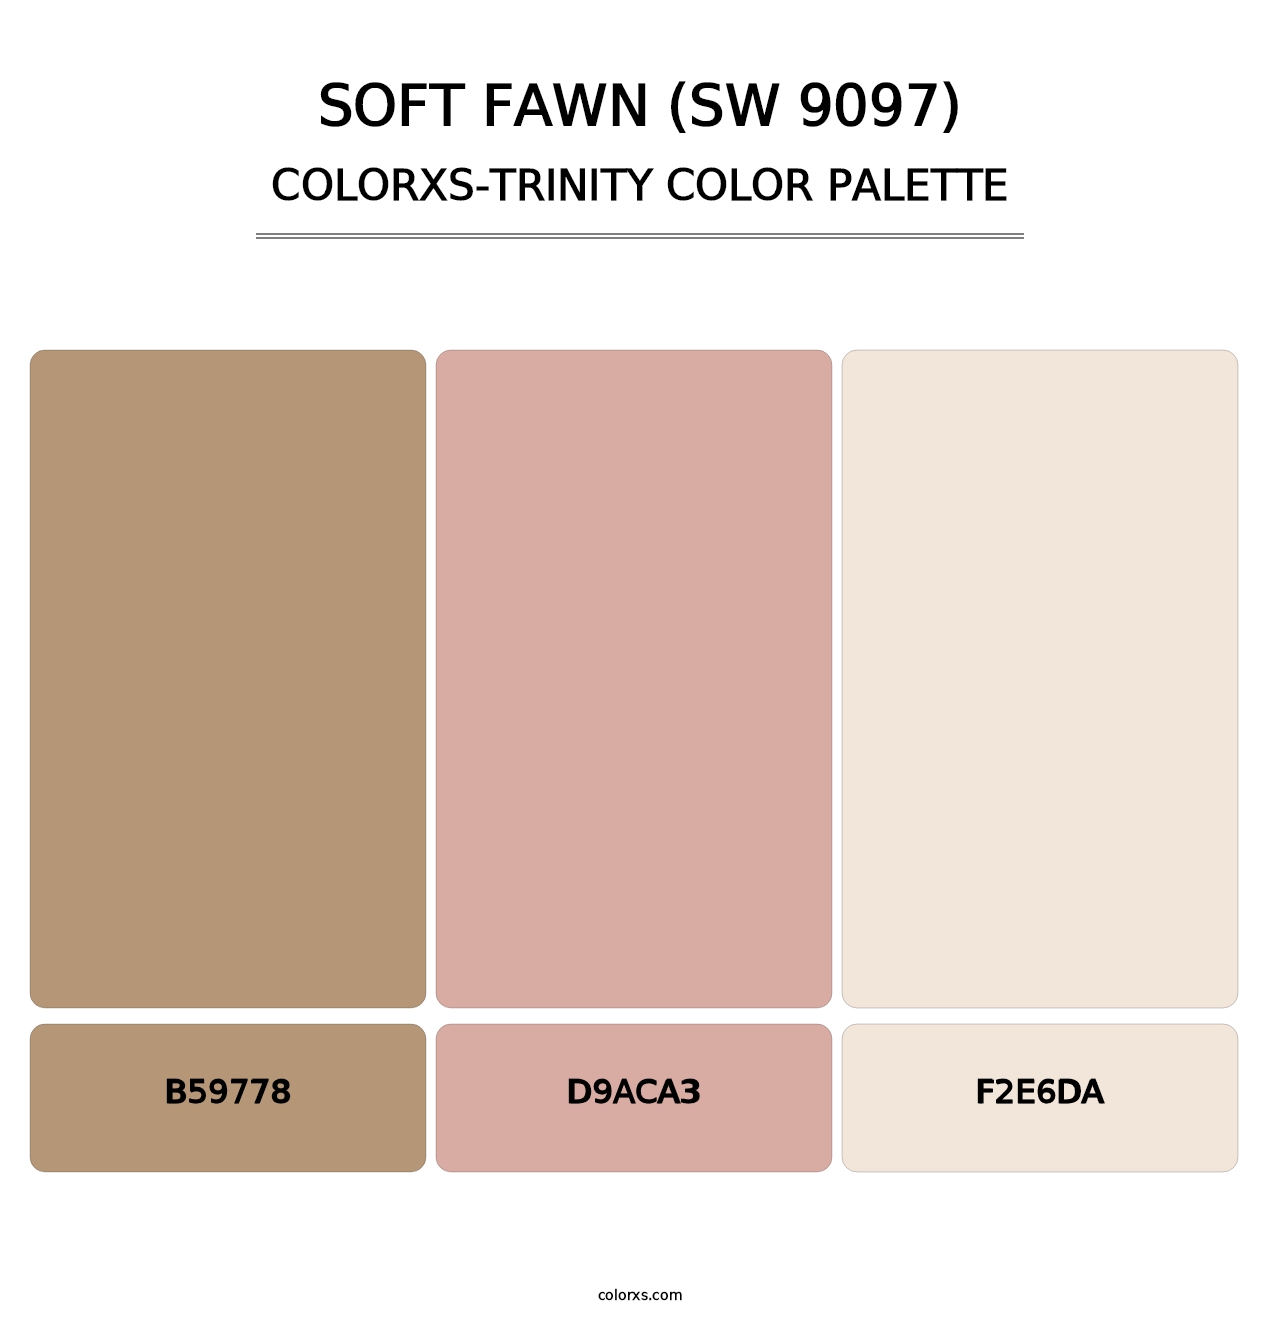 Soft Fawn (SW 9097) - Colorxs Trinity Palette